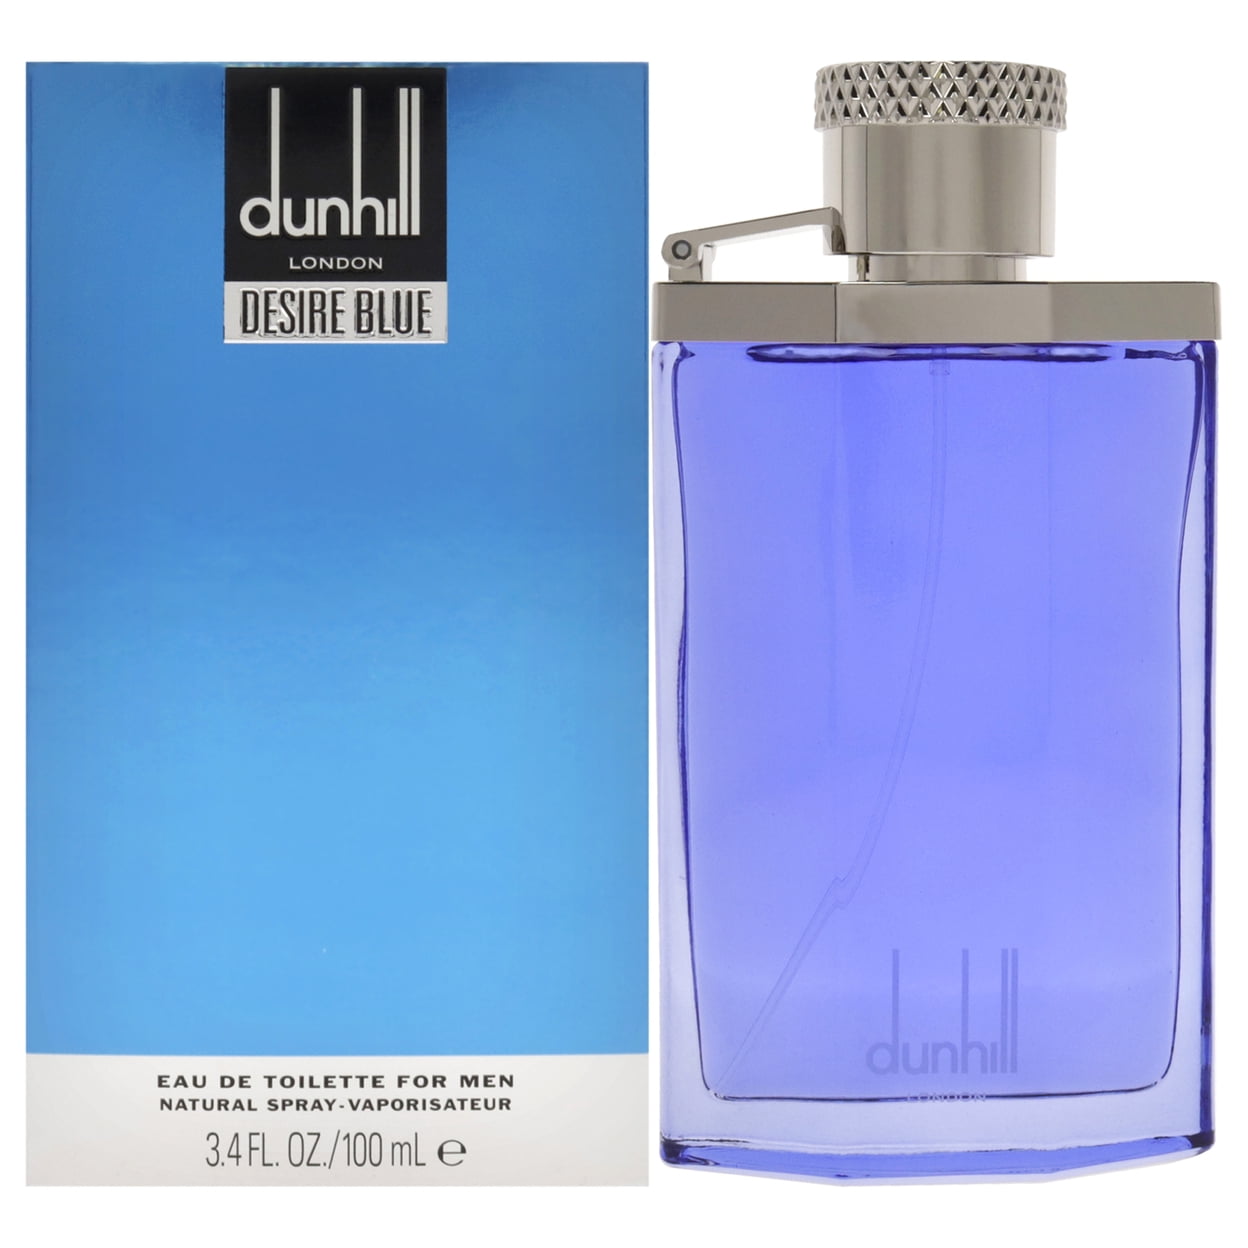 DUNHILL LONDON DESIRE BLUE BY ALFRED DUNHILL By ALFRED DUNHILL For MEN Cologne $18.56